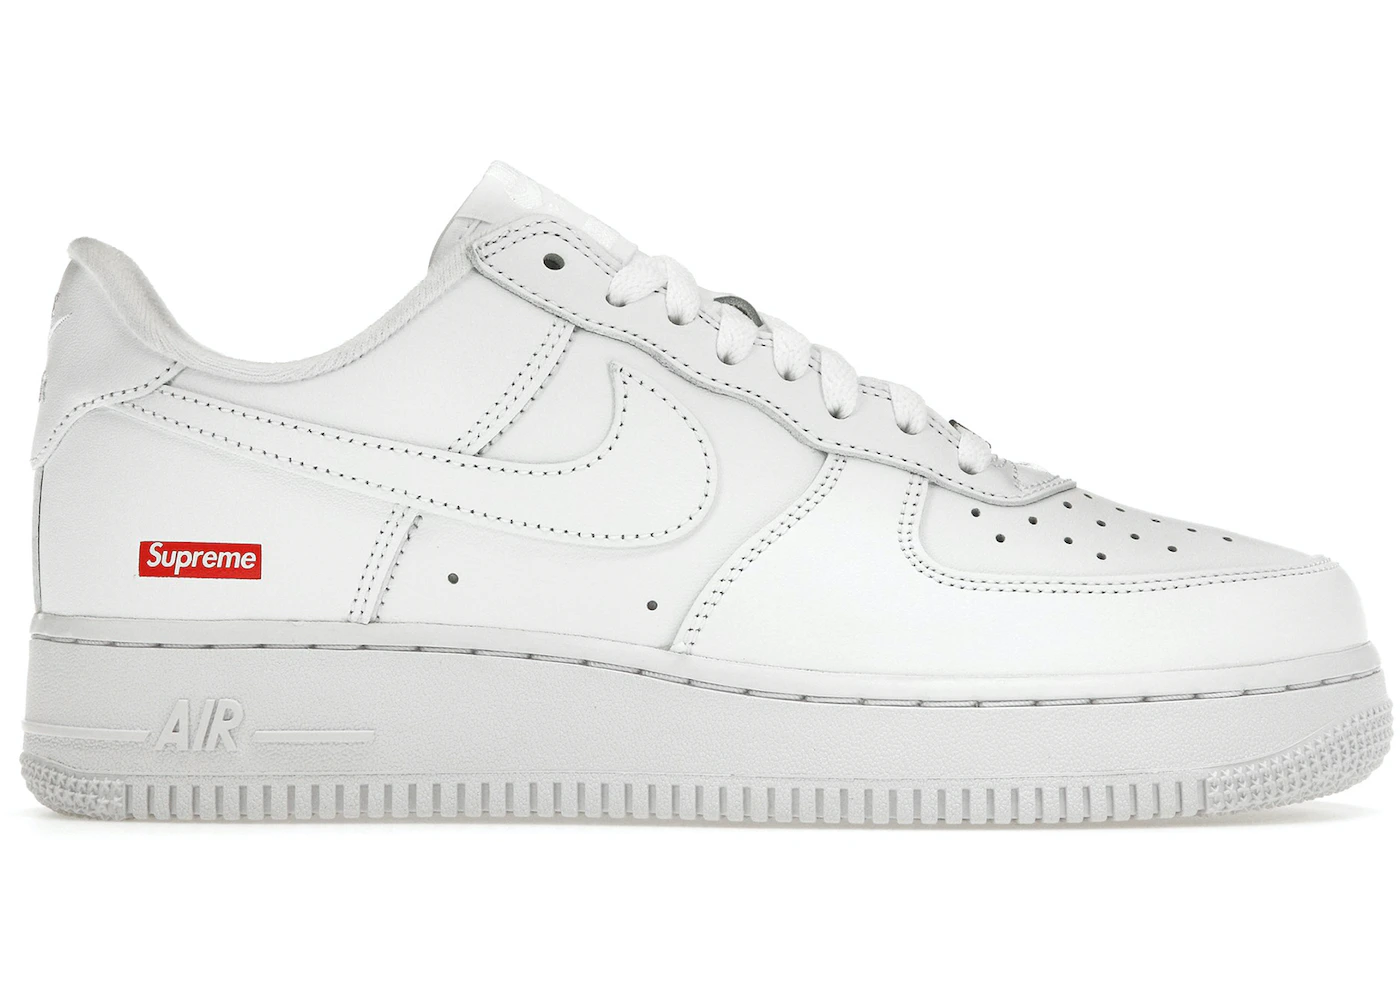 Kilauea Mountain In reality Approximation Nike Air Force 1 Low Supreme White - CU9225-100 - US